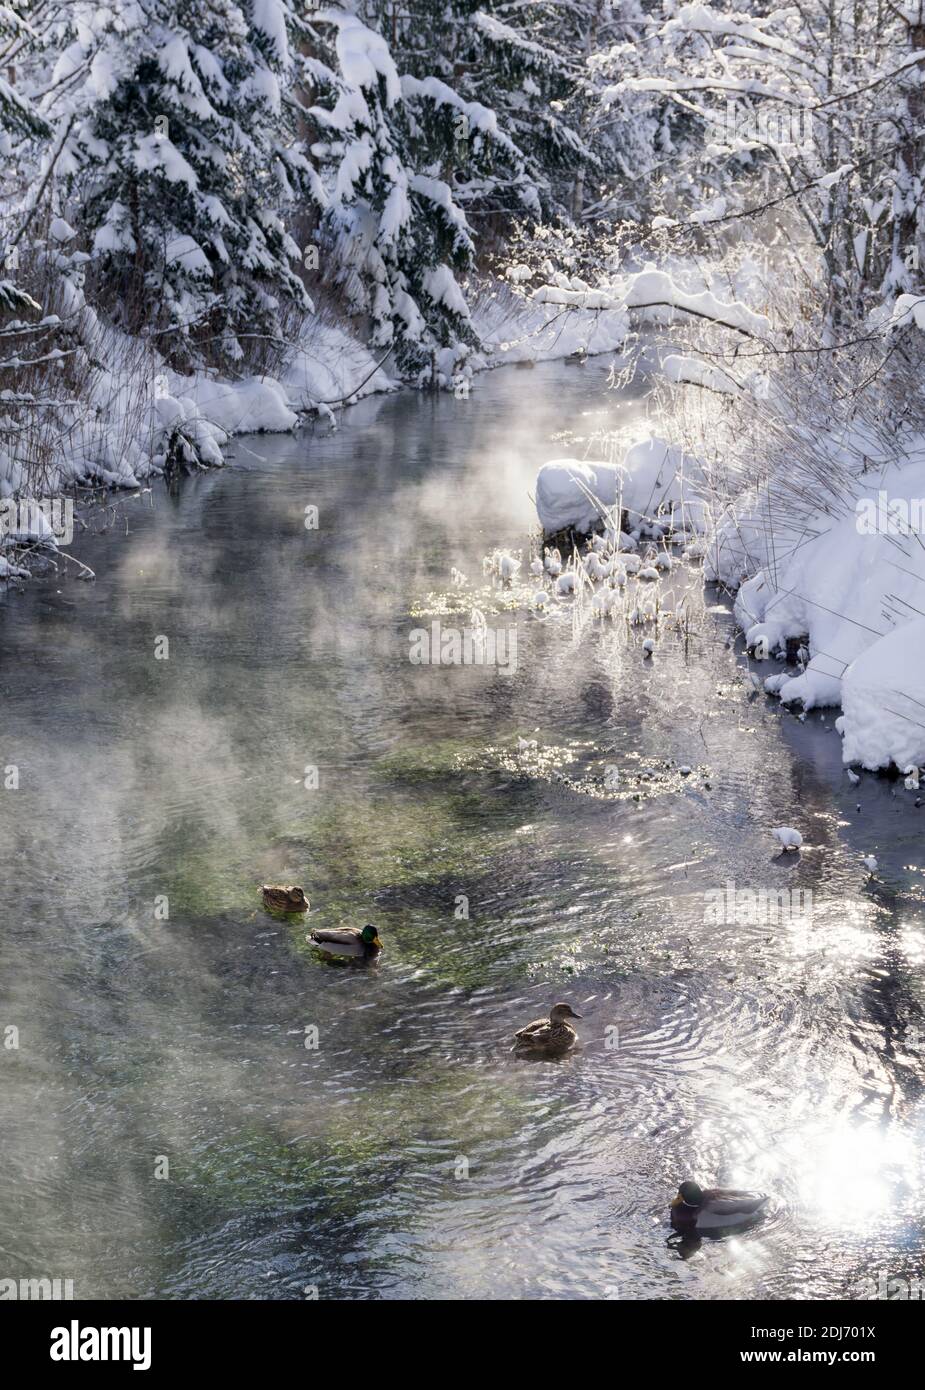 Winter mountain landscape with river or stream. Trees covered with snow and hoarfrost, ducks on water, reflection of the sun in the water. Sunny winte Stock Photo